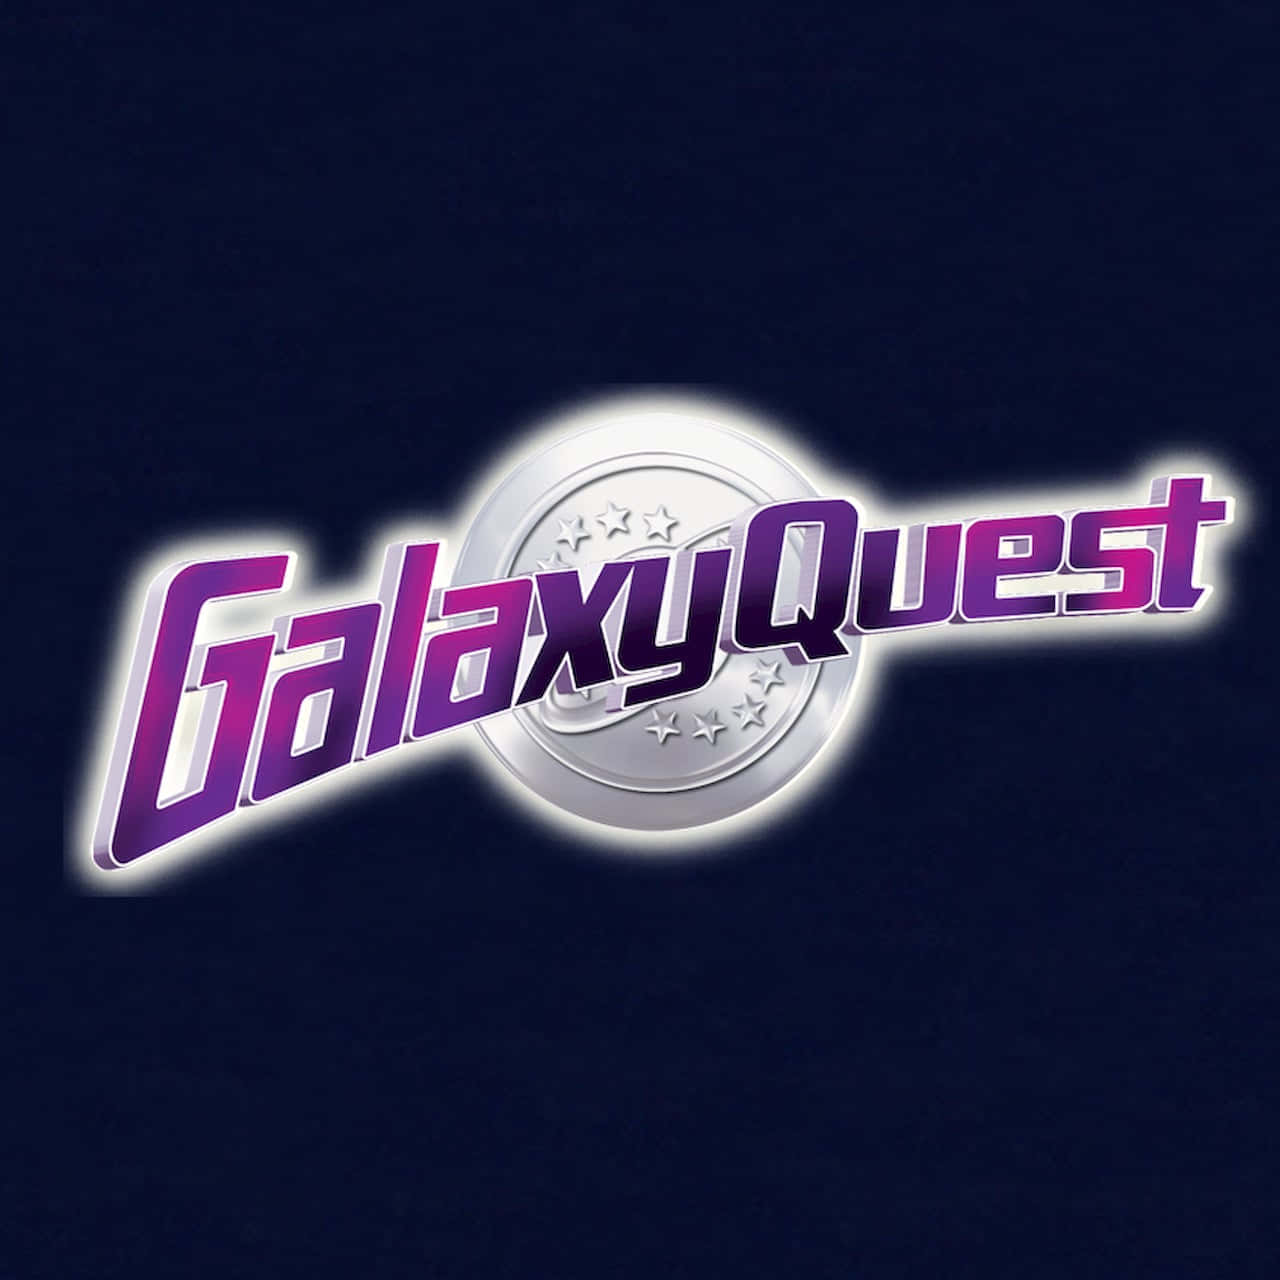 The Galaxy Quest crew in their iconic uniforms Wallpaper